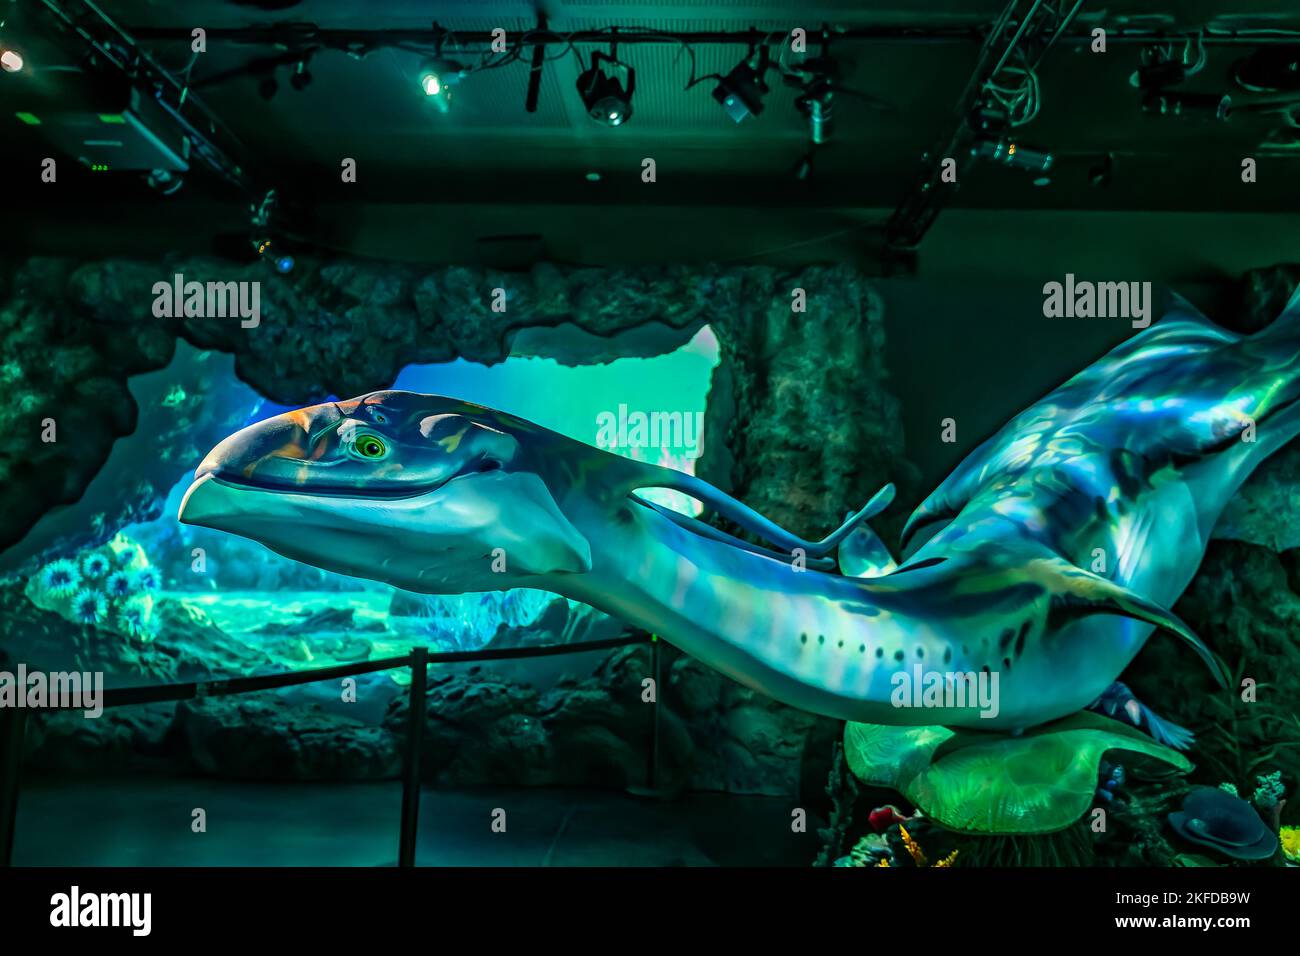 Avatar -The Experience at Clouds Forest, Gardens by the bay, Singapore. Stock Photo